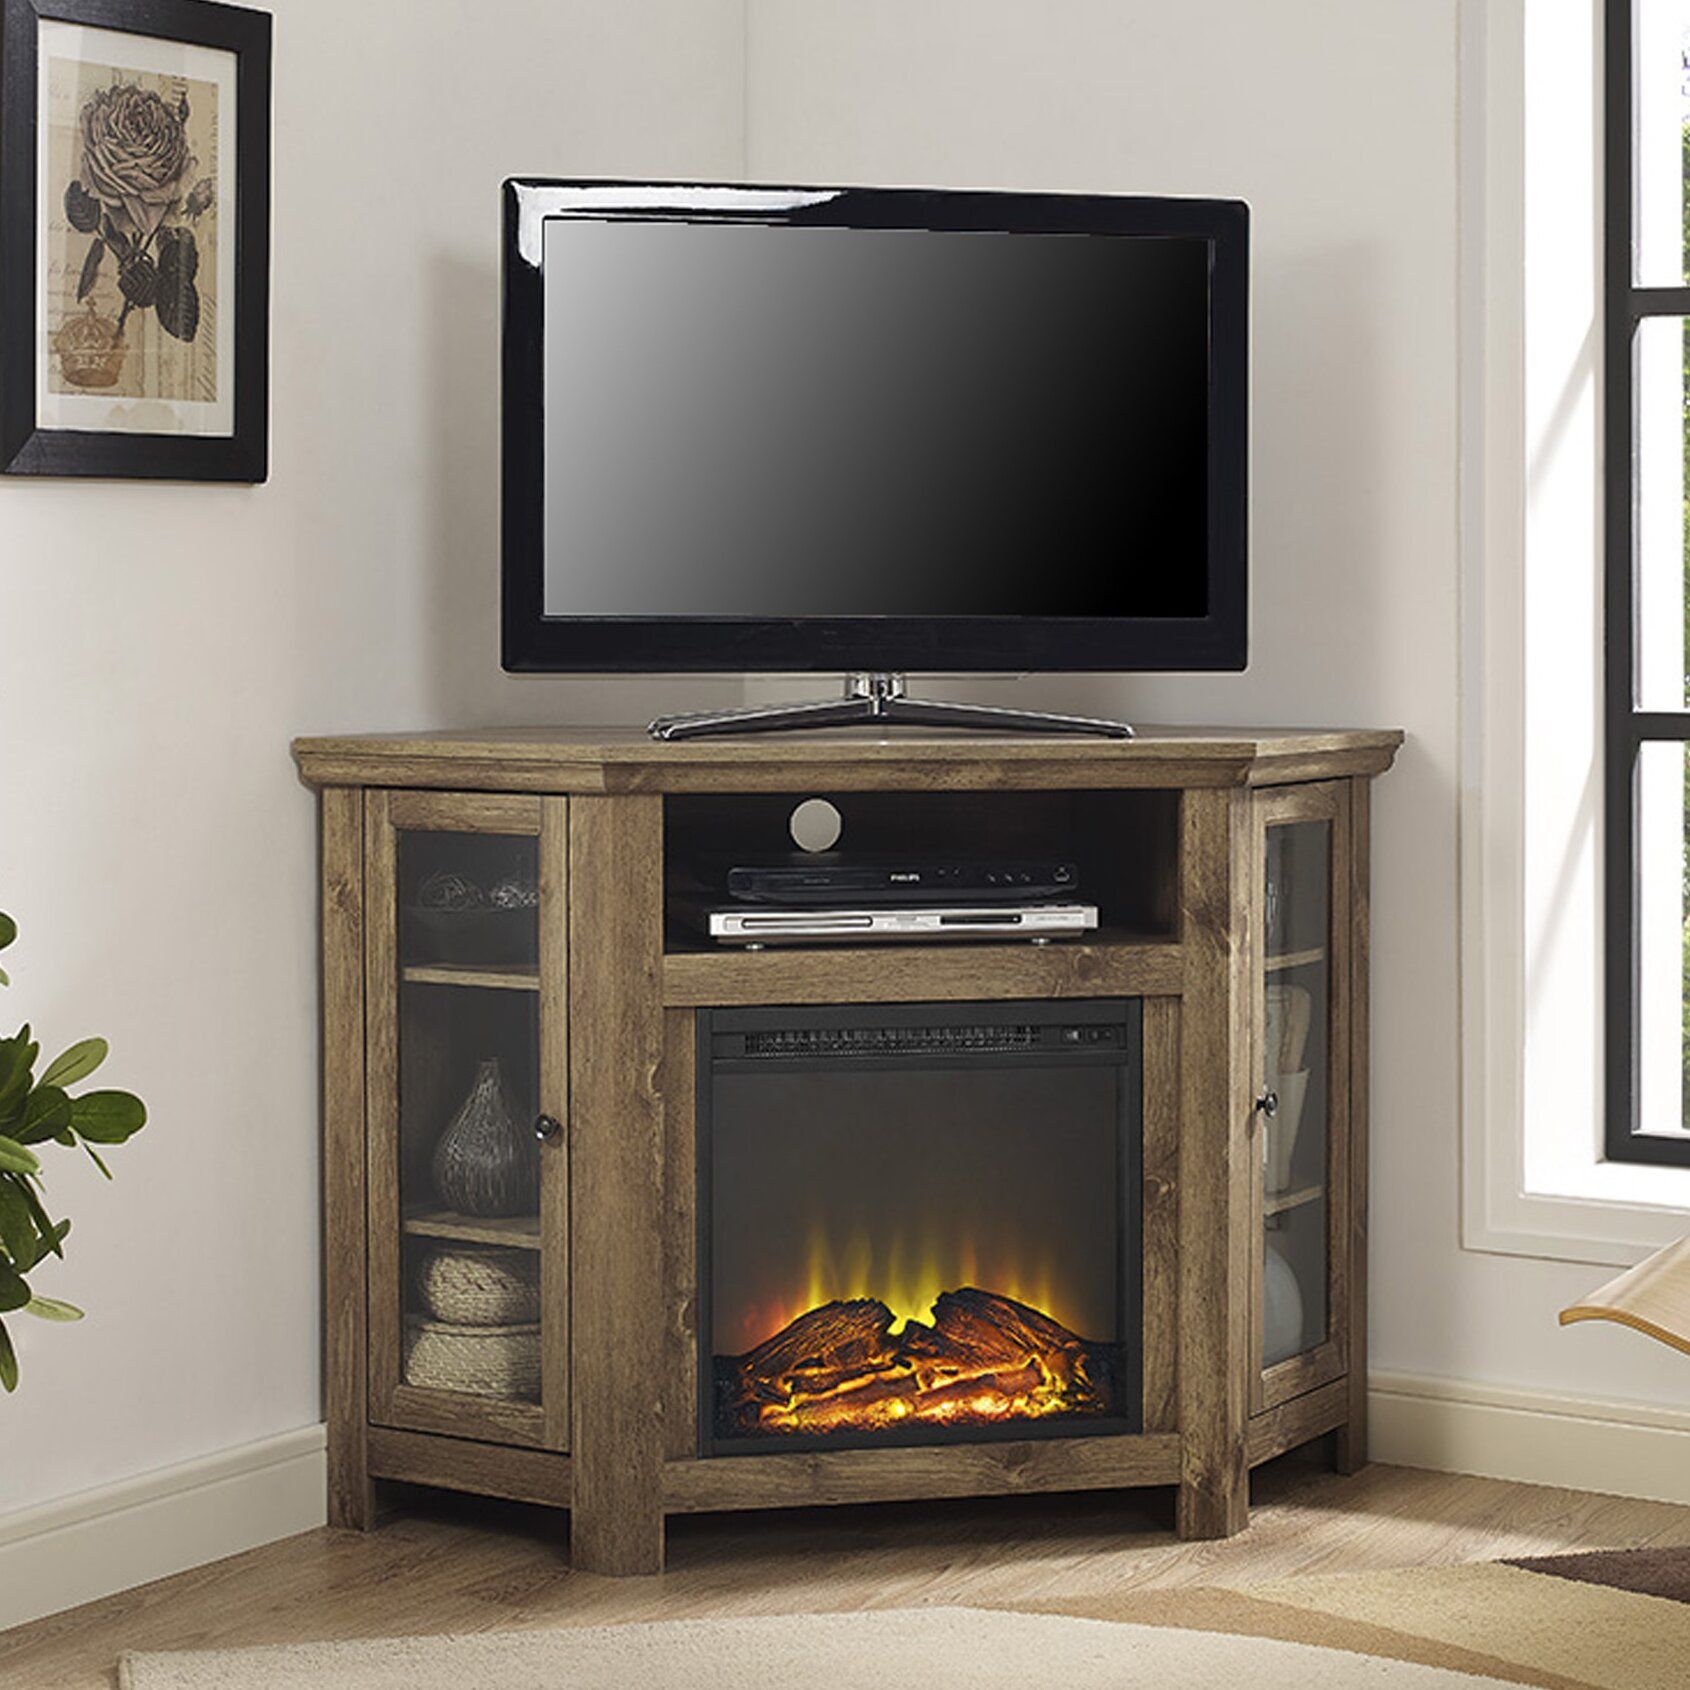 Loon Peak Pueblo Corner Tv Stand With Electric Fireplace For Small Corner Tv Cabinets (View 14 of 15)